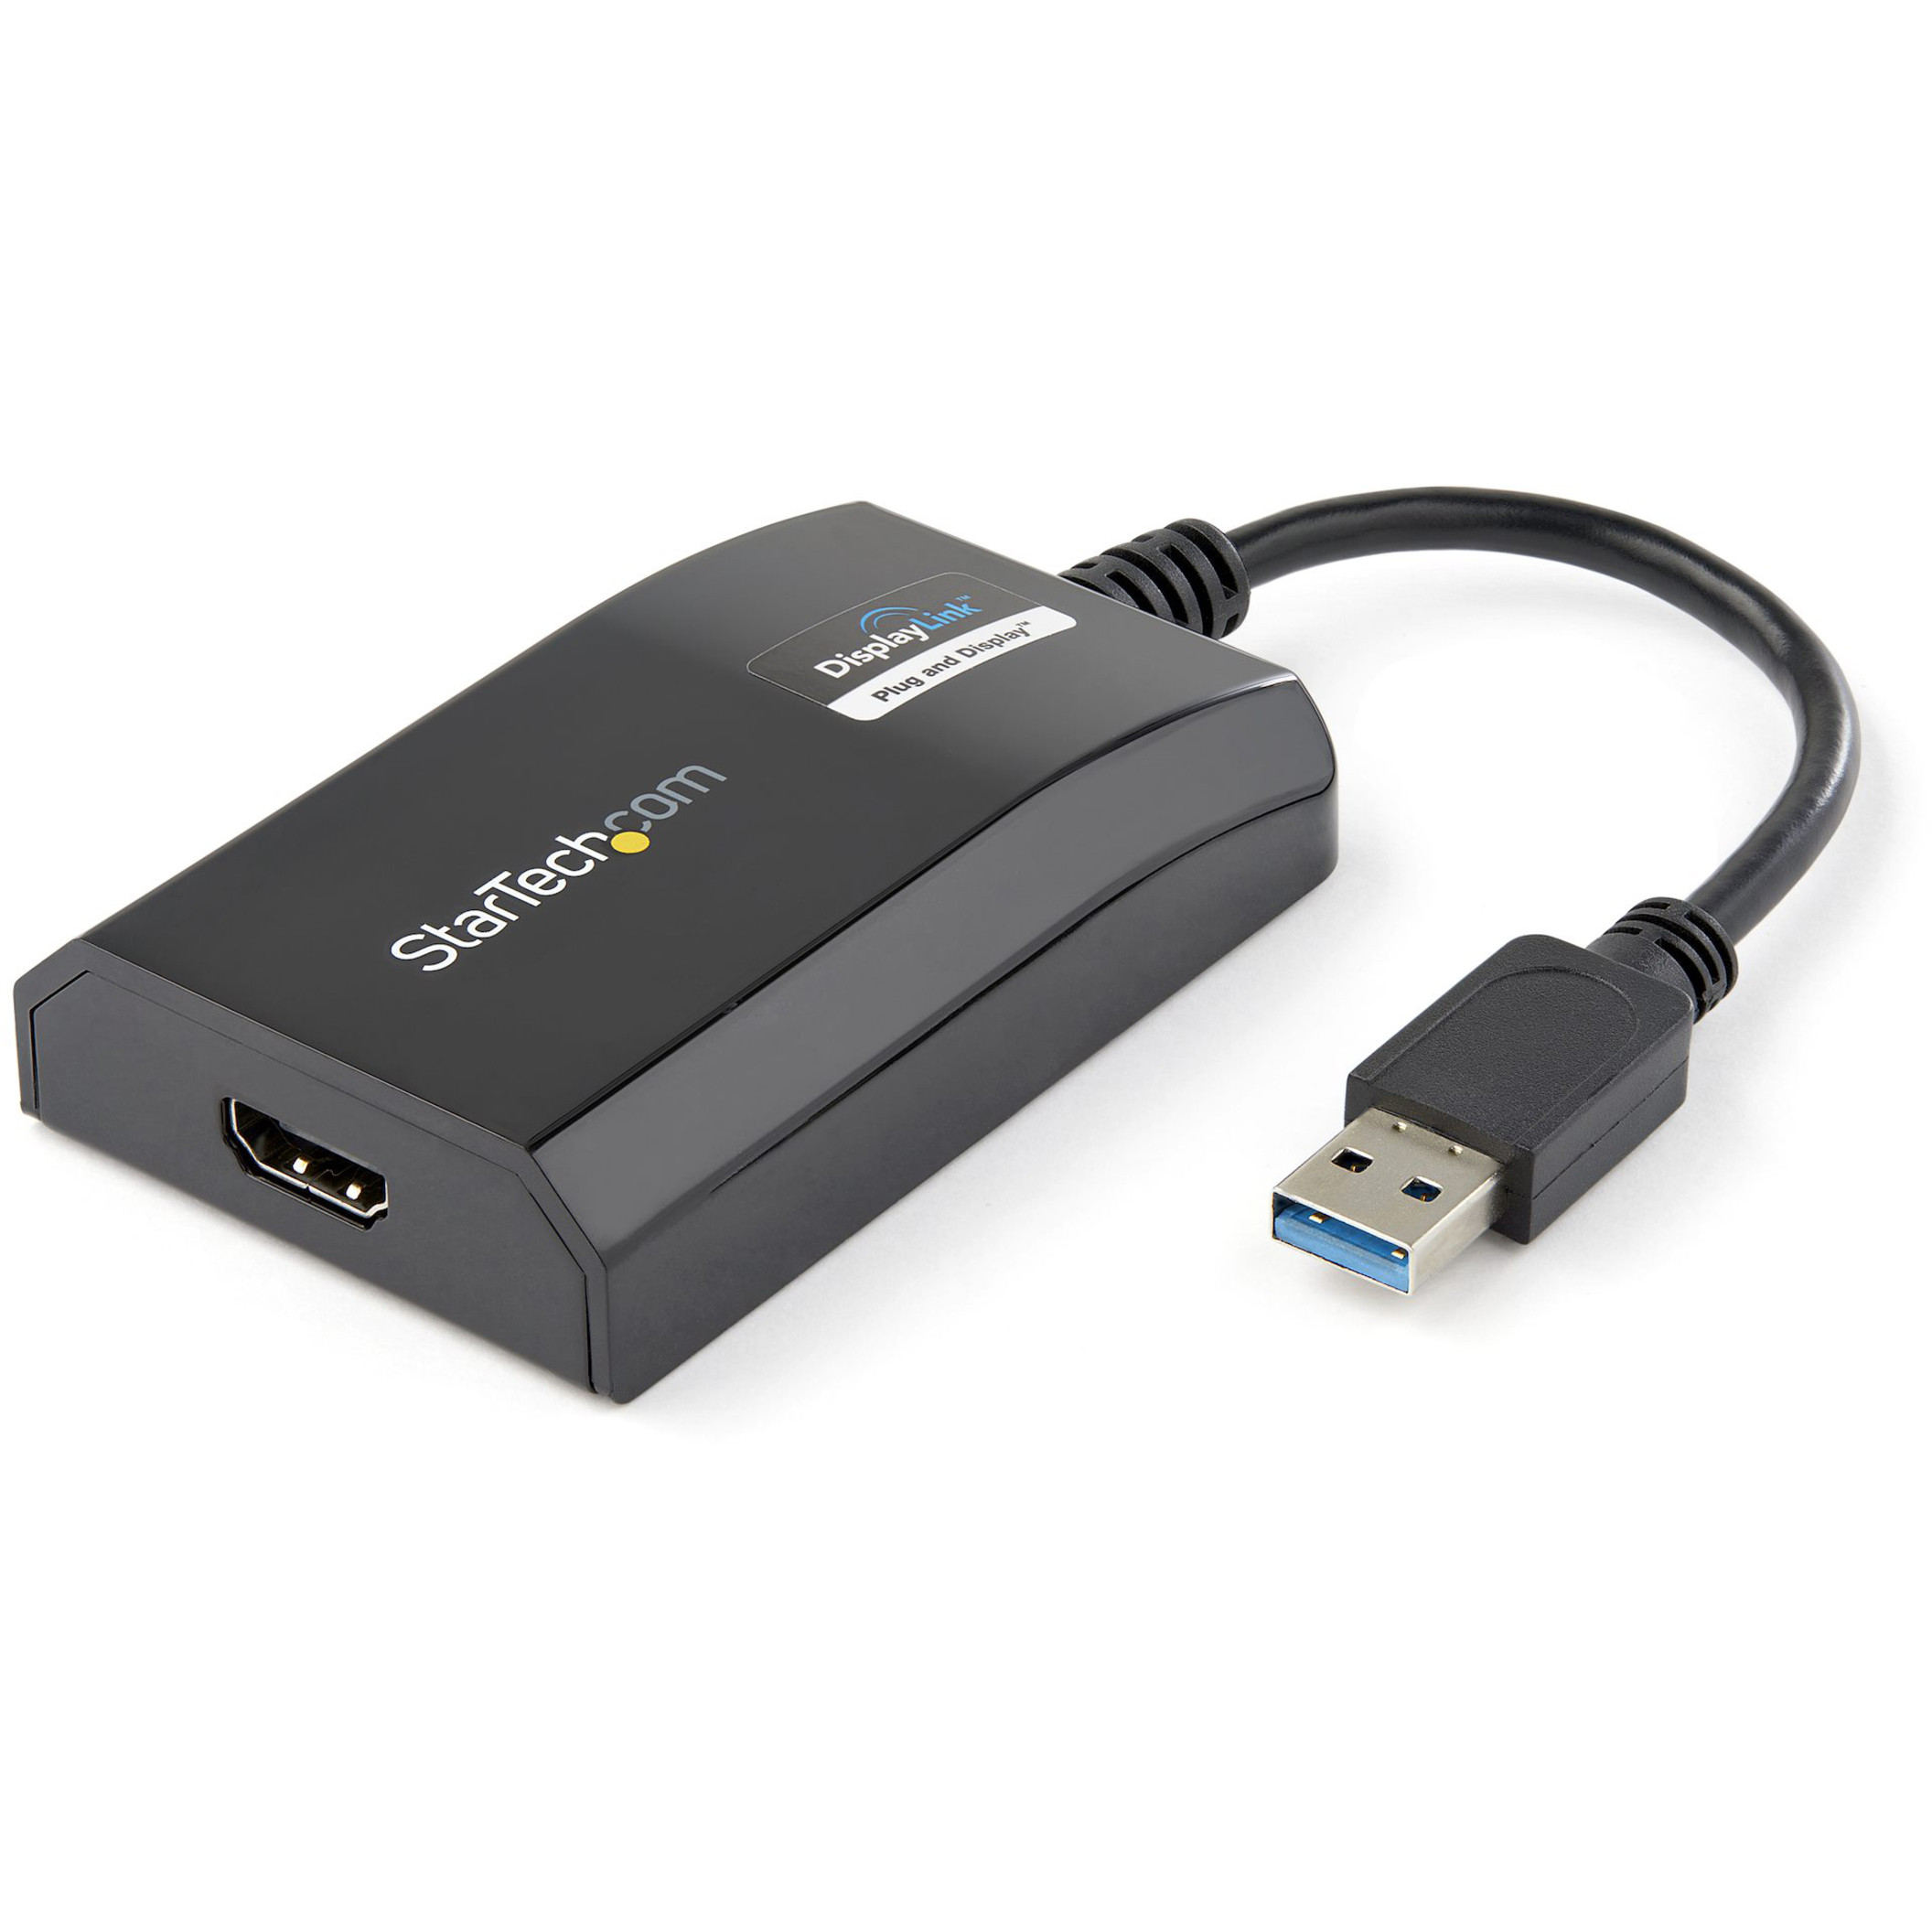 Startech .com USB 3.0 to HDMI Adapter, DisplayLink Certified, 1920x1200,  USB-A to HDMI Display Adapter, External Graphics Card for Mac/PCUS  USB32HDPRO - Corporate Armor